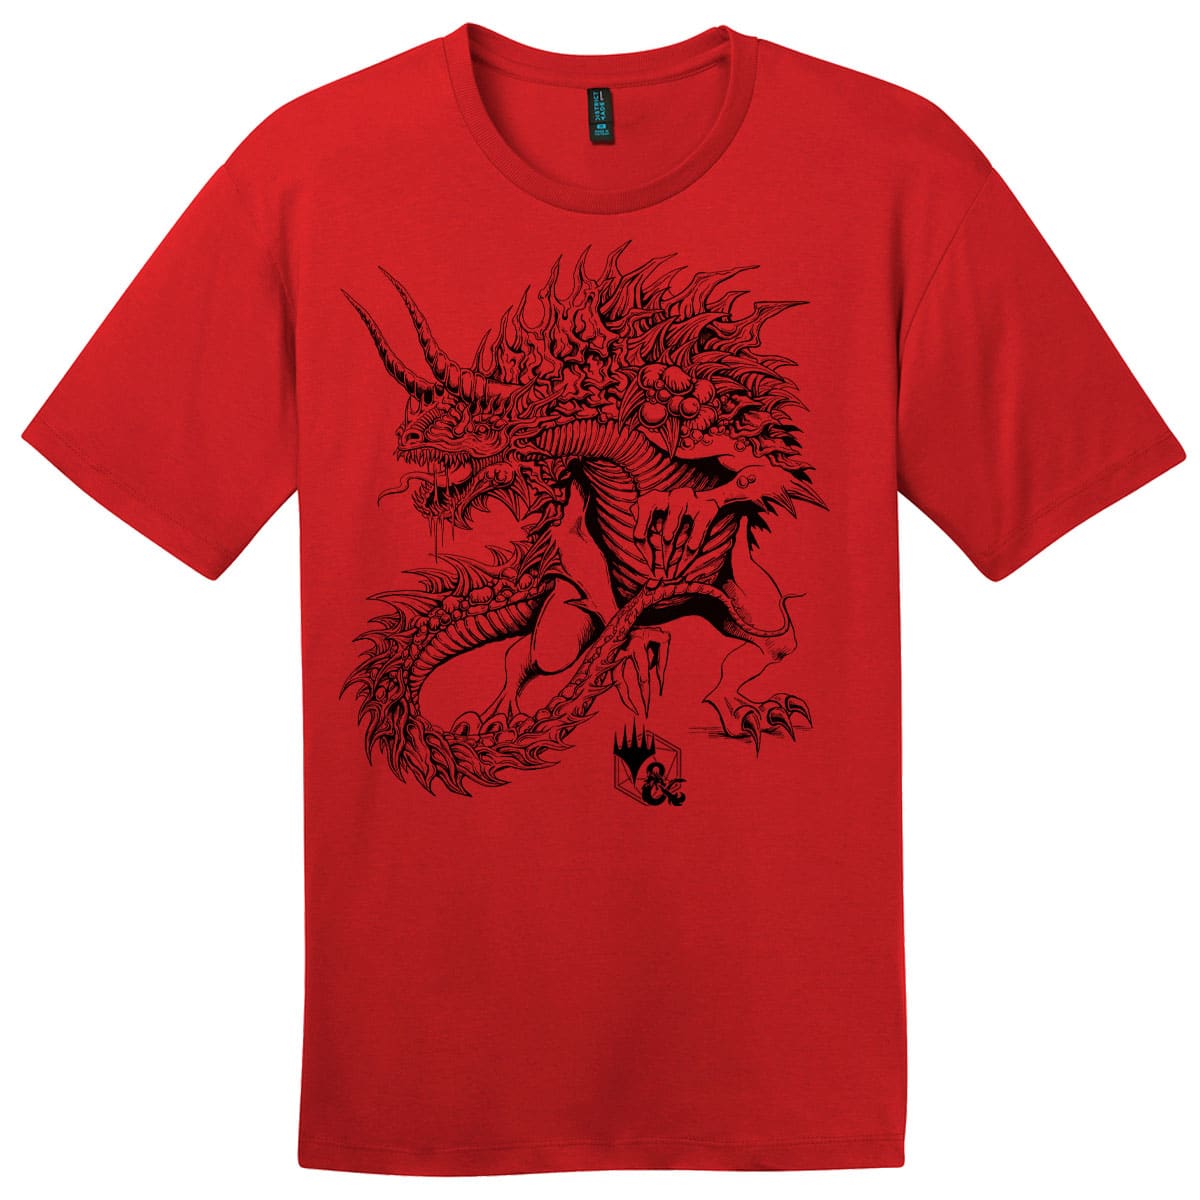 Adventures in the Forgotten Realms Tarrasque T-shirt for Dungeons and Dragons - MTG Pro Shop